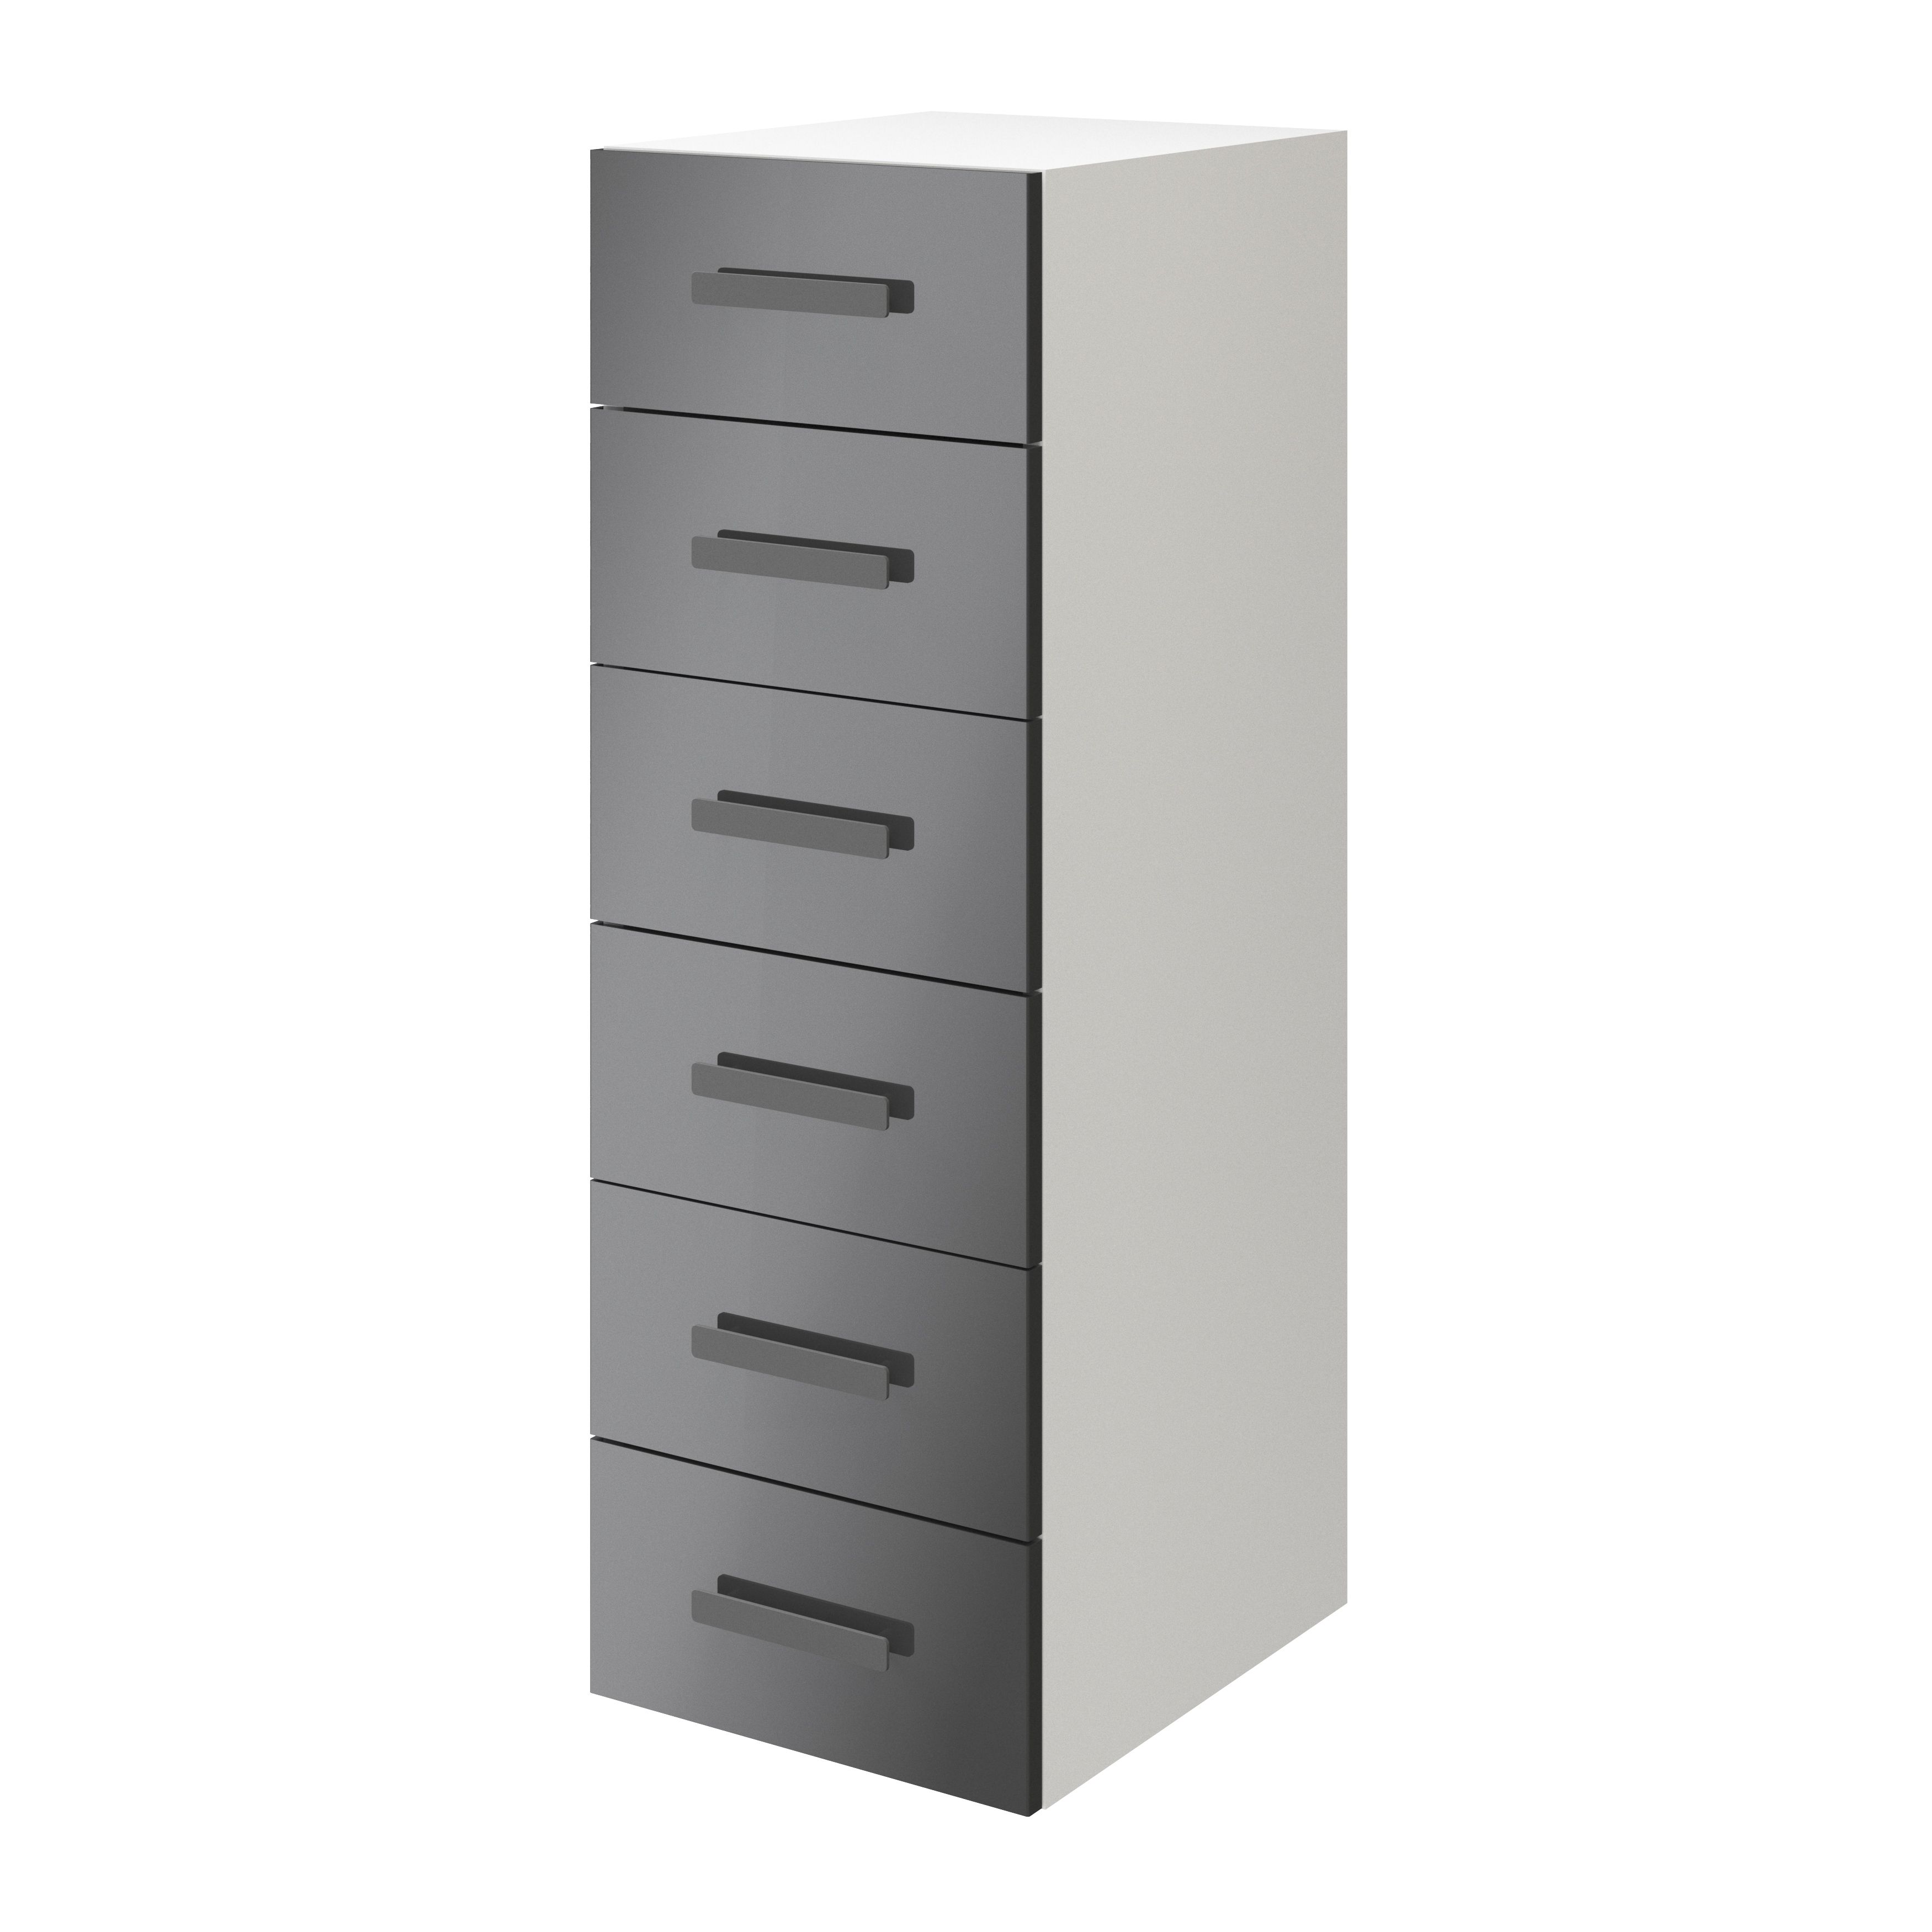 Atomia Freestanding Gloss anthracite & white 6 Drawer Tall Chest of drawers (H)1125mm (W)375mm (D)450mm